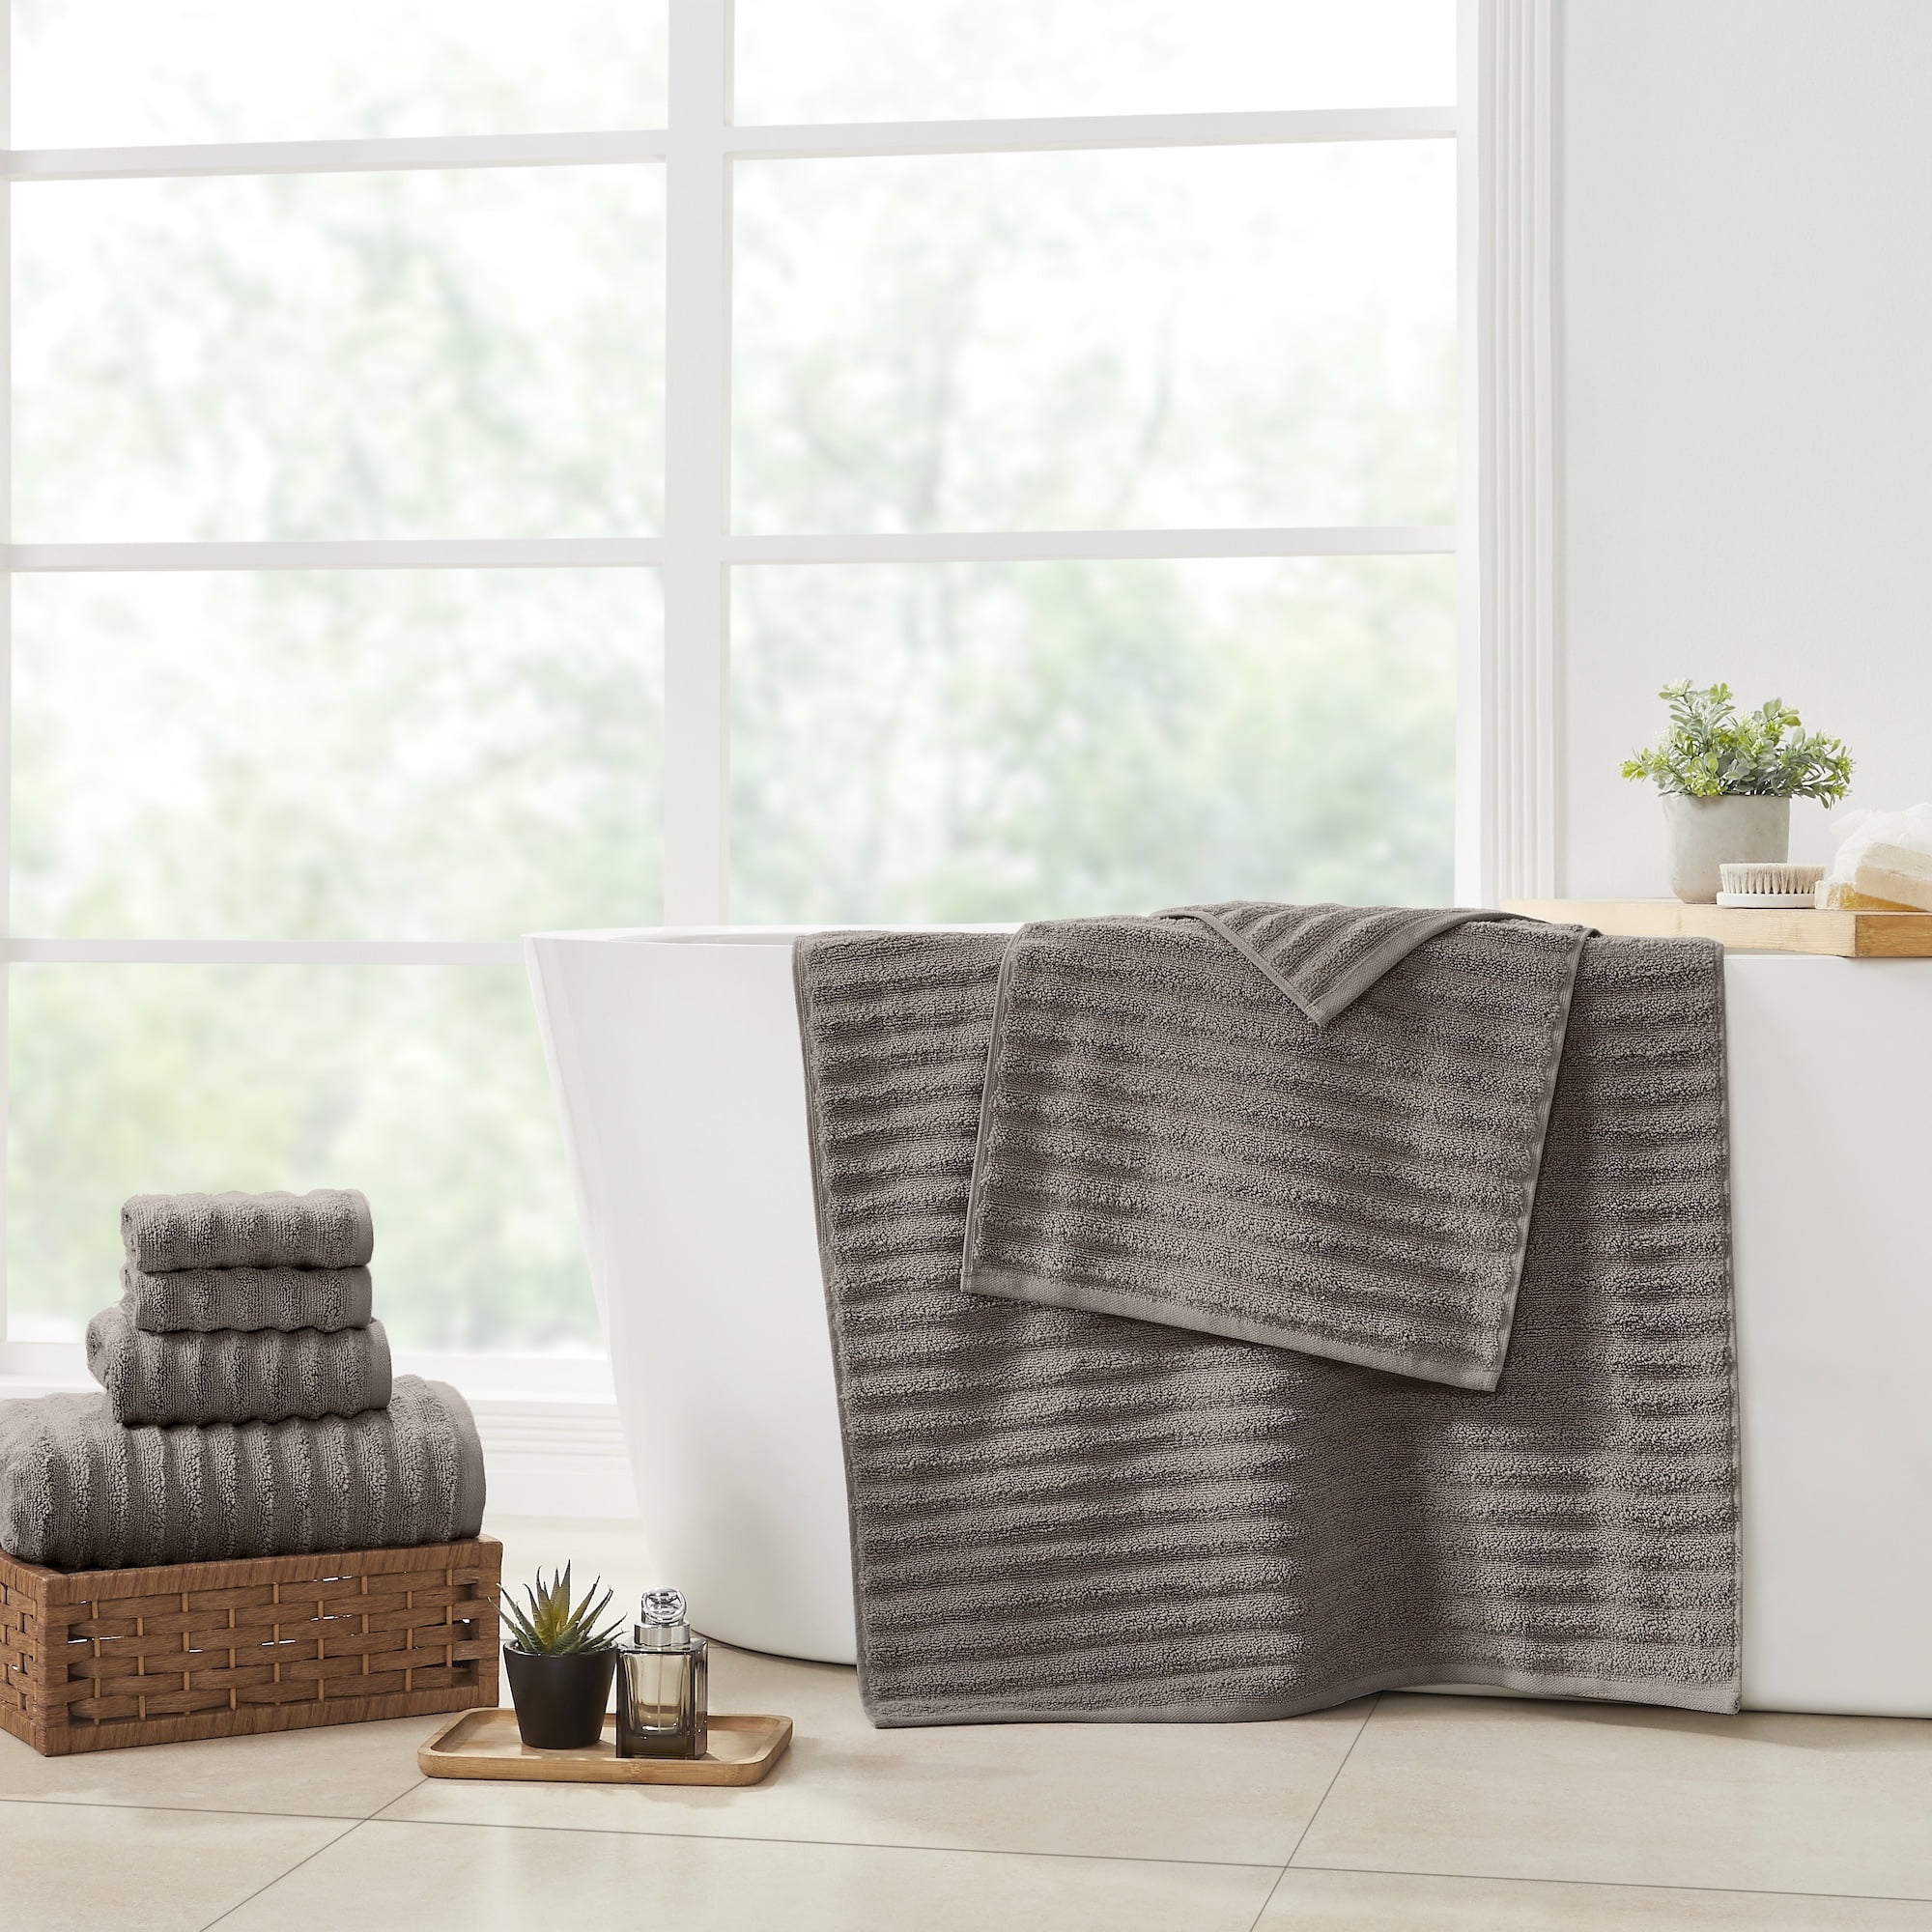 Pack of 2 Luxury Large Bath Cotton Towels – EXCELSIOR INTERNATIONAL